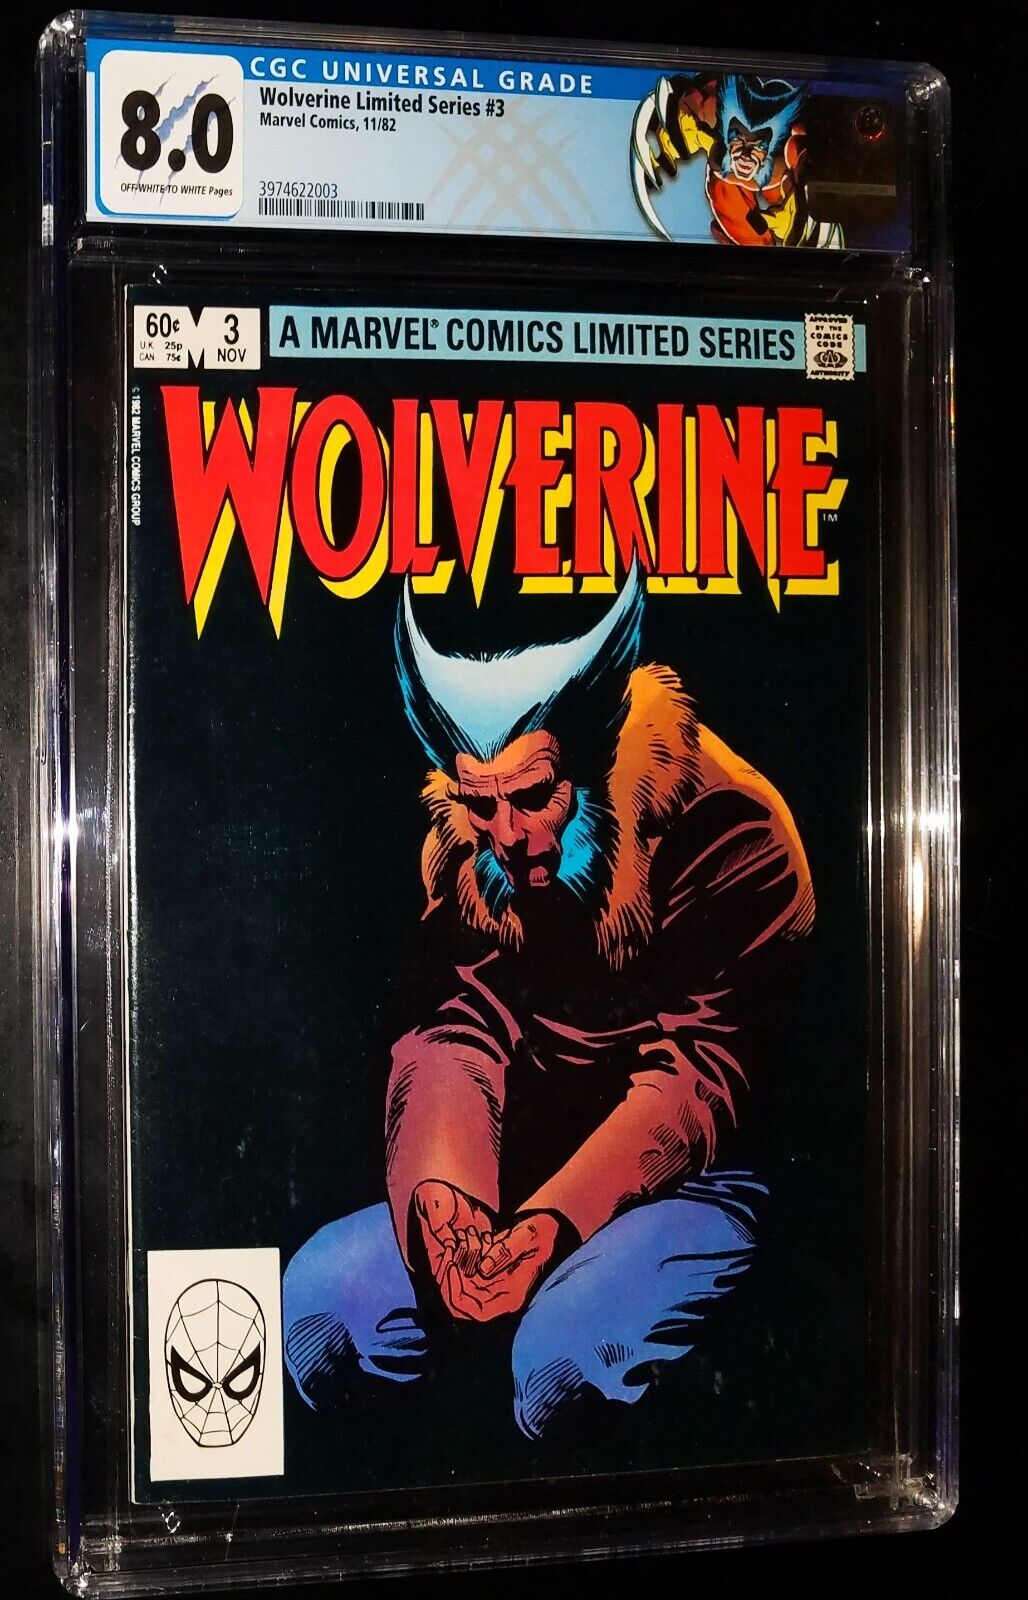 WOLVERINE LIMITED SERIES #3 1982 Marvel Comics CGC 8.0 Very Fine KEY ISSUE